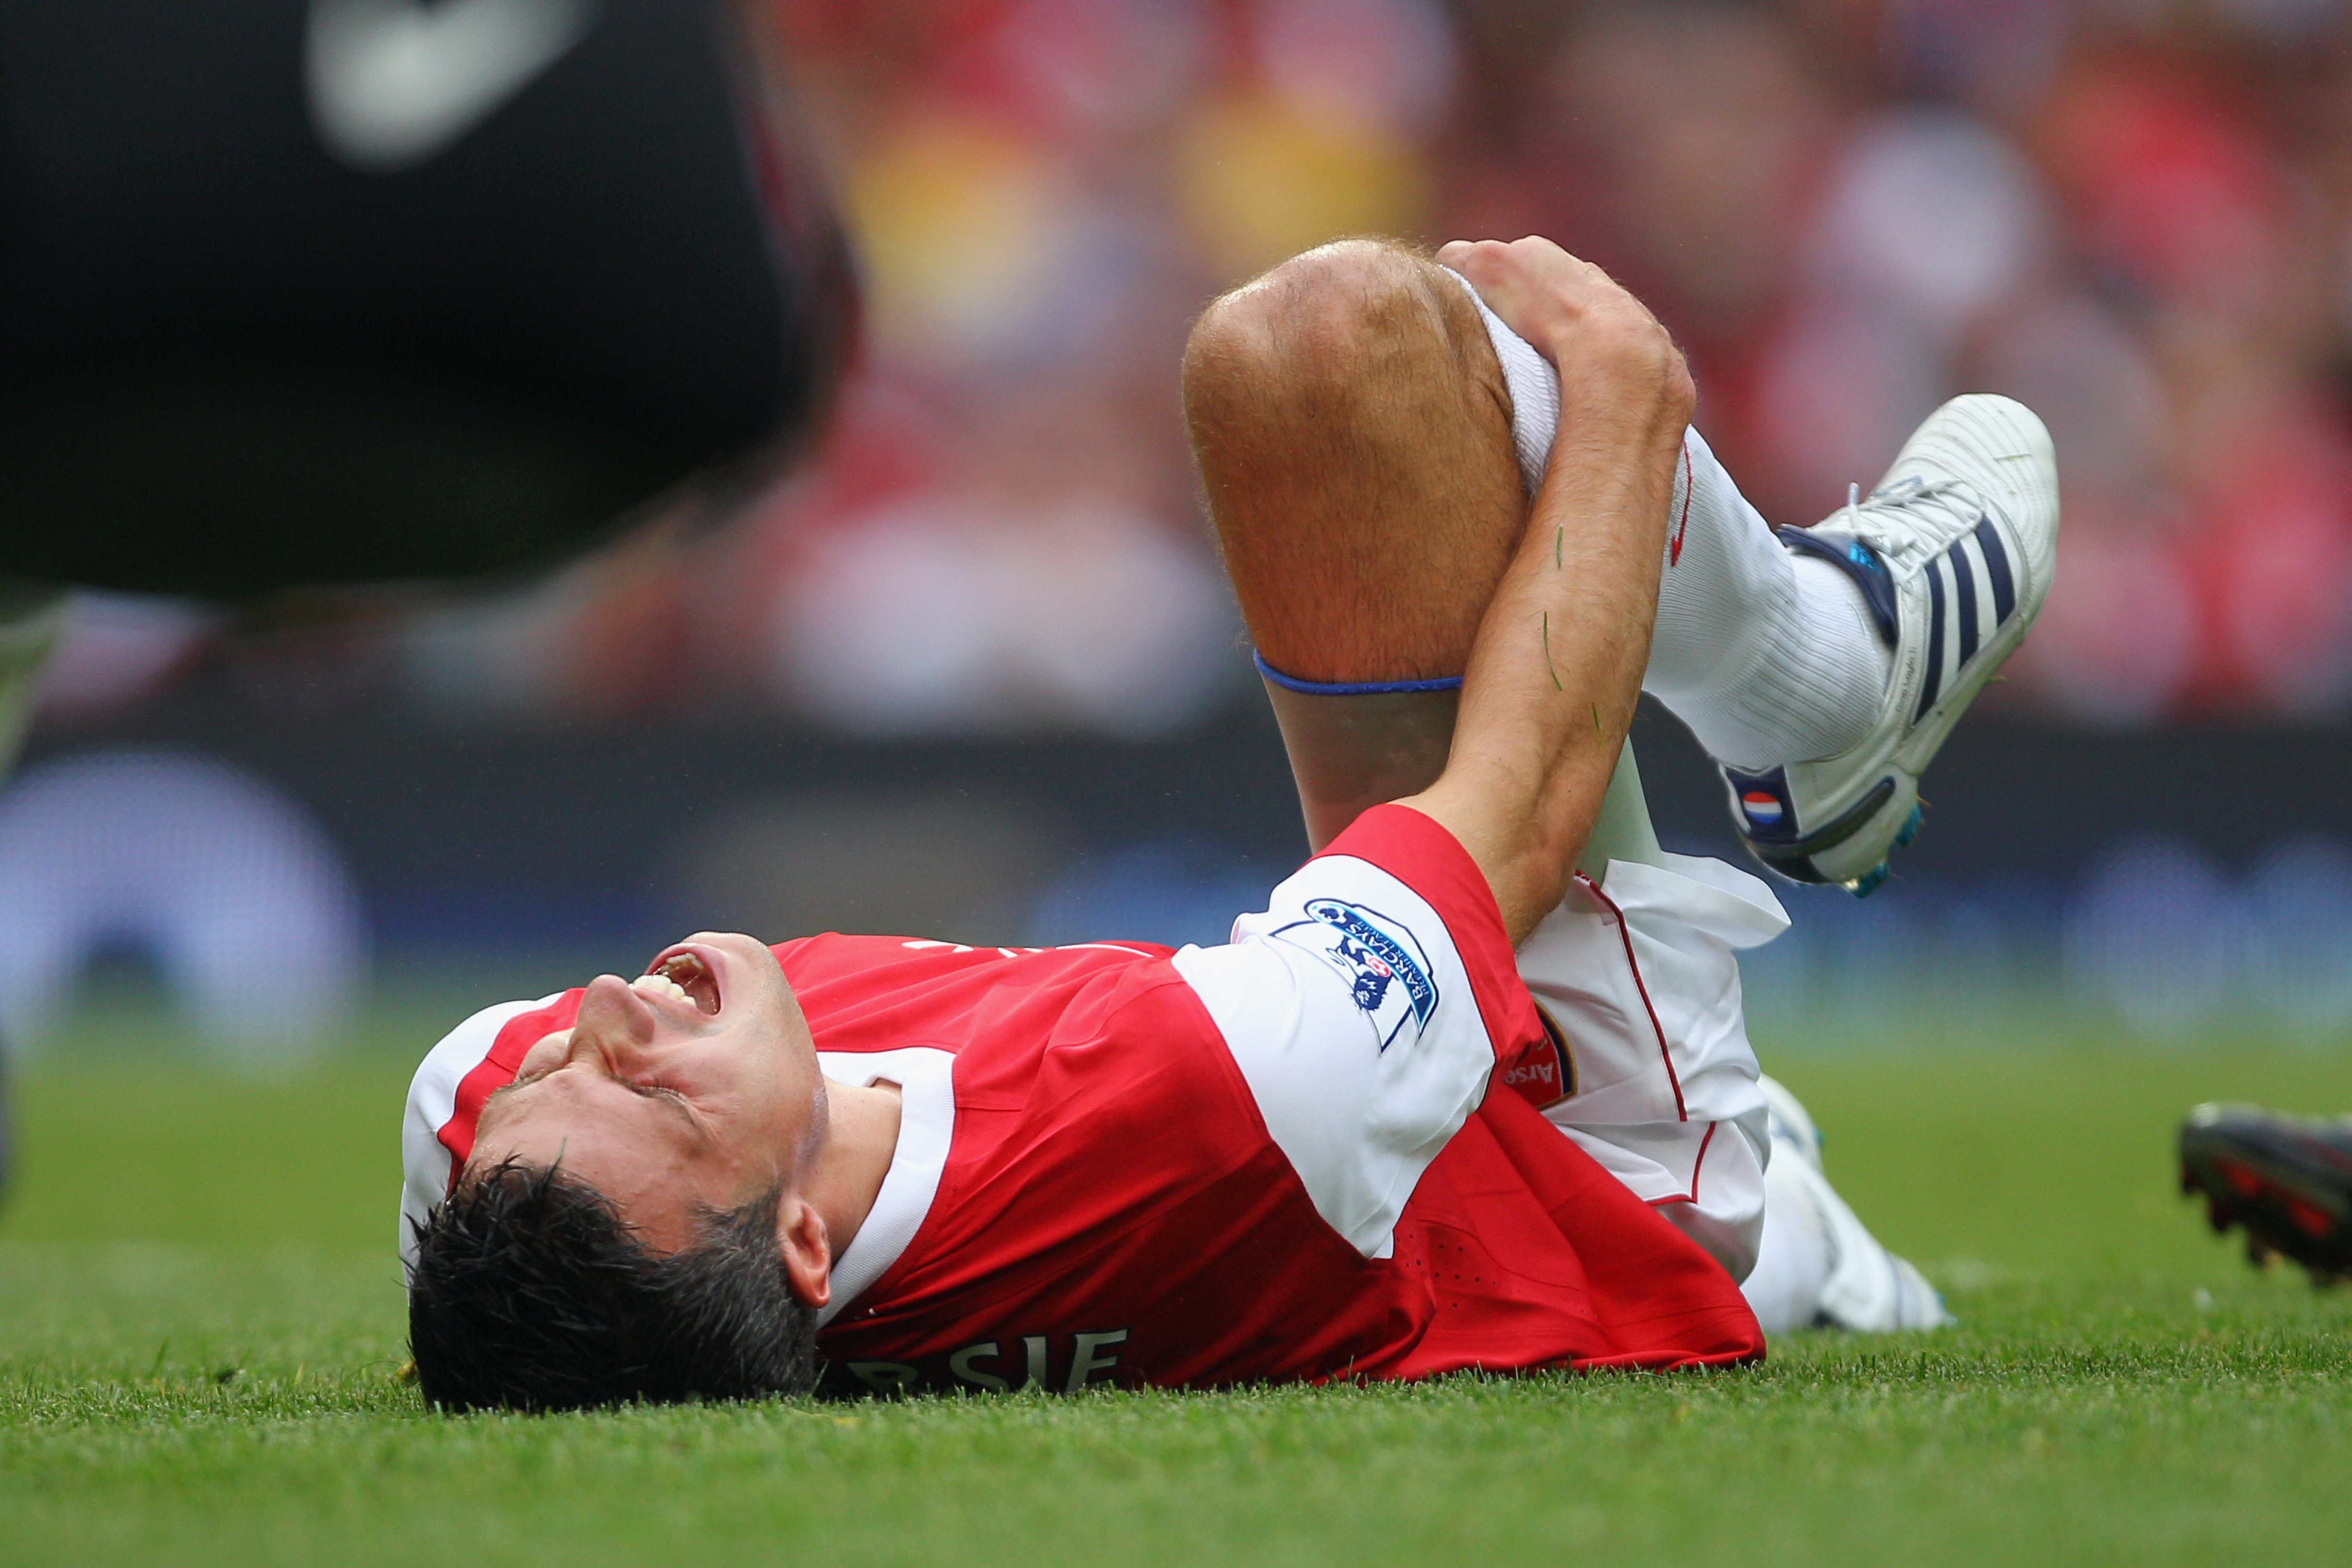 Sure, it's just one injury. But it's a bad omen for a Gunners team looking to challenge for the crown.